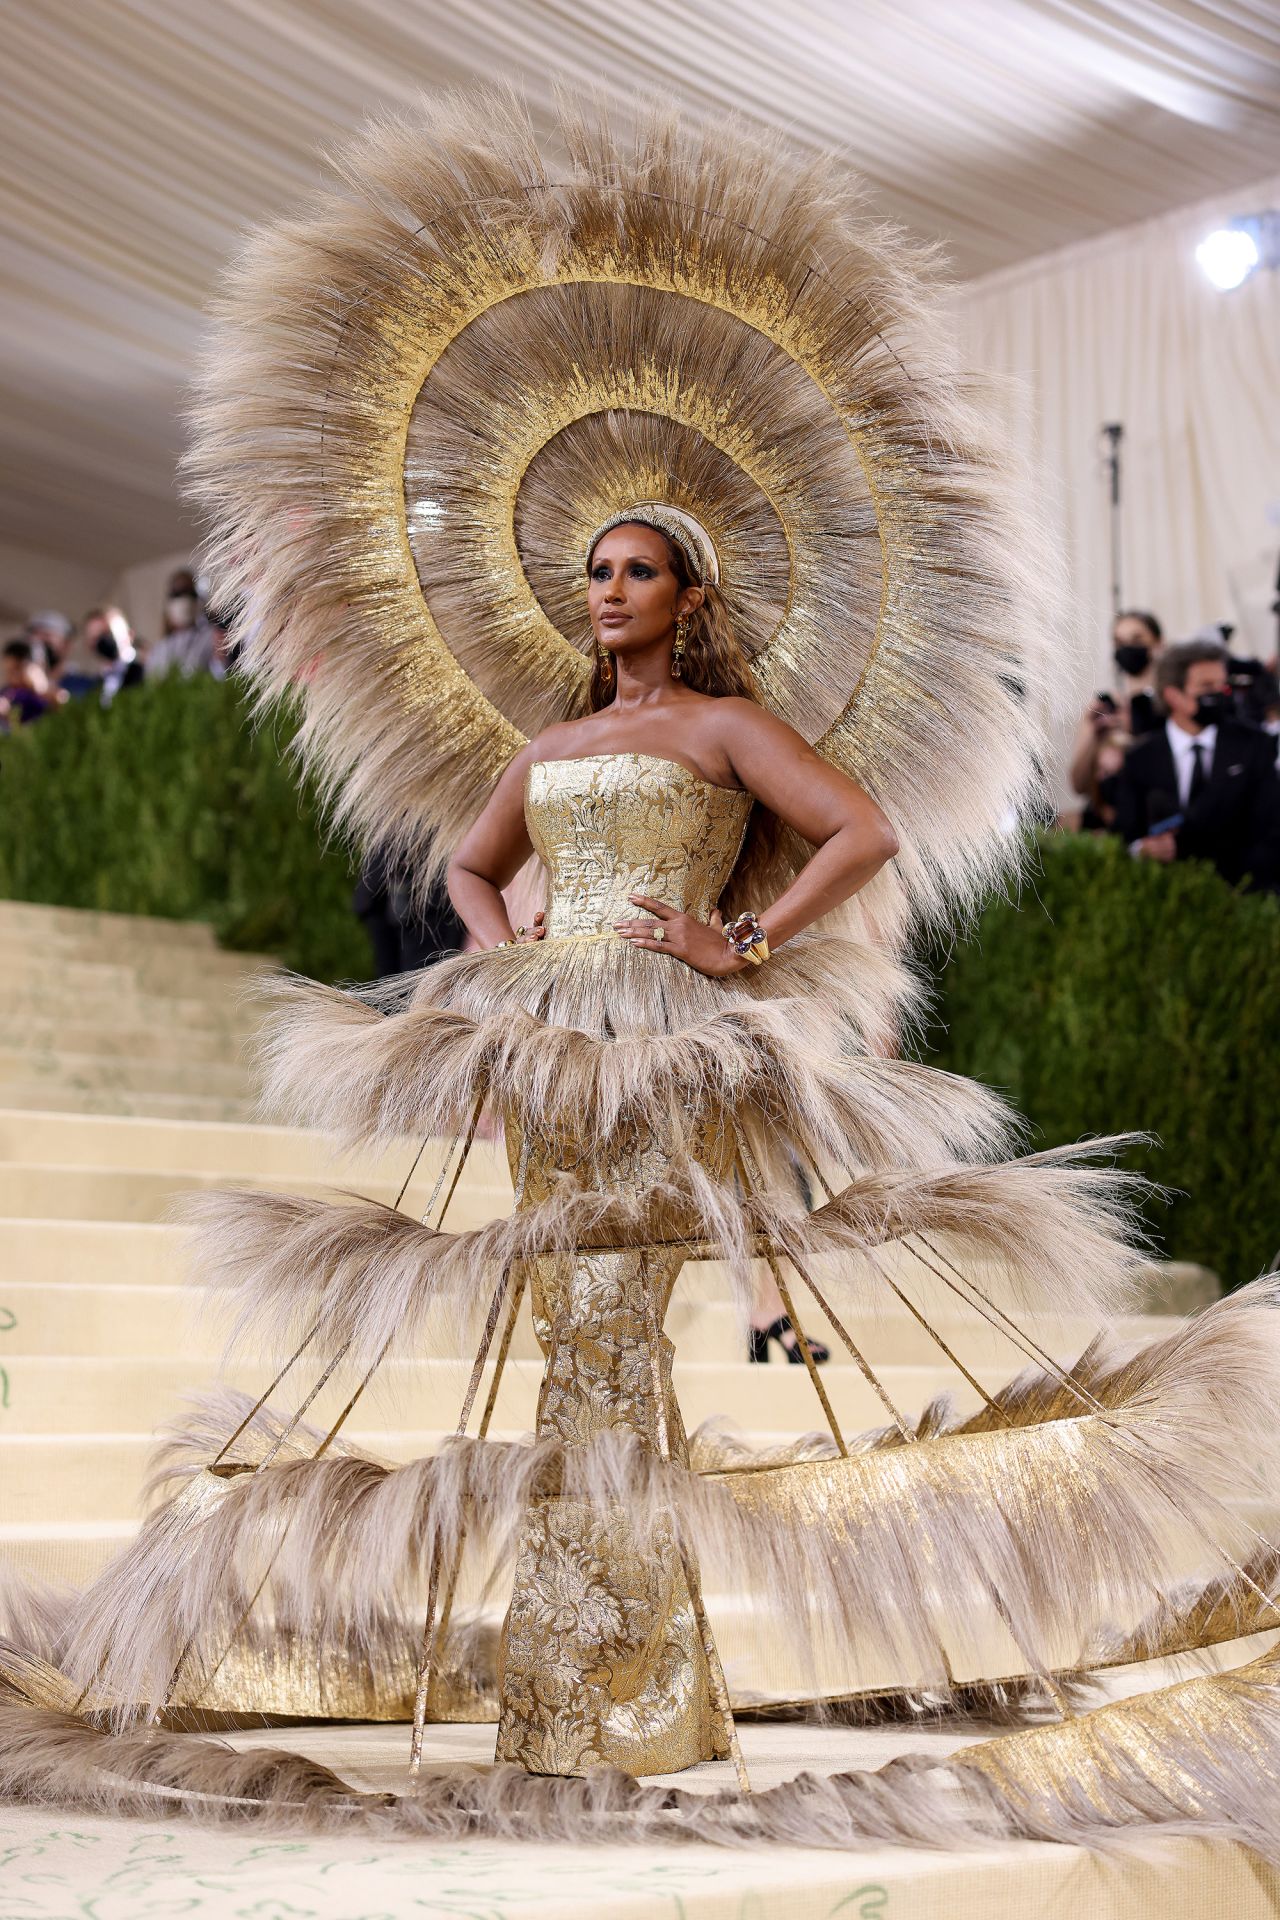 Supermodel Iman turned heads in a dramatic feathery headdress from Harris Reed with a matching tiered skirt over a glittering gold bell-bottom bodysuit.